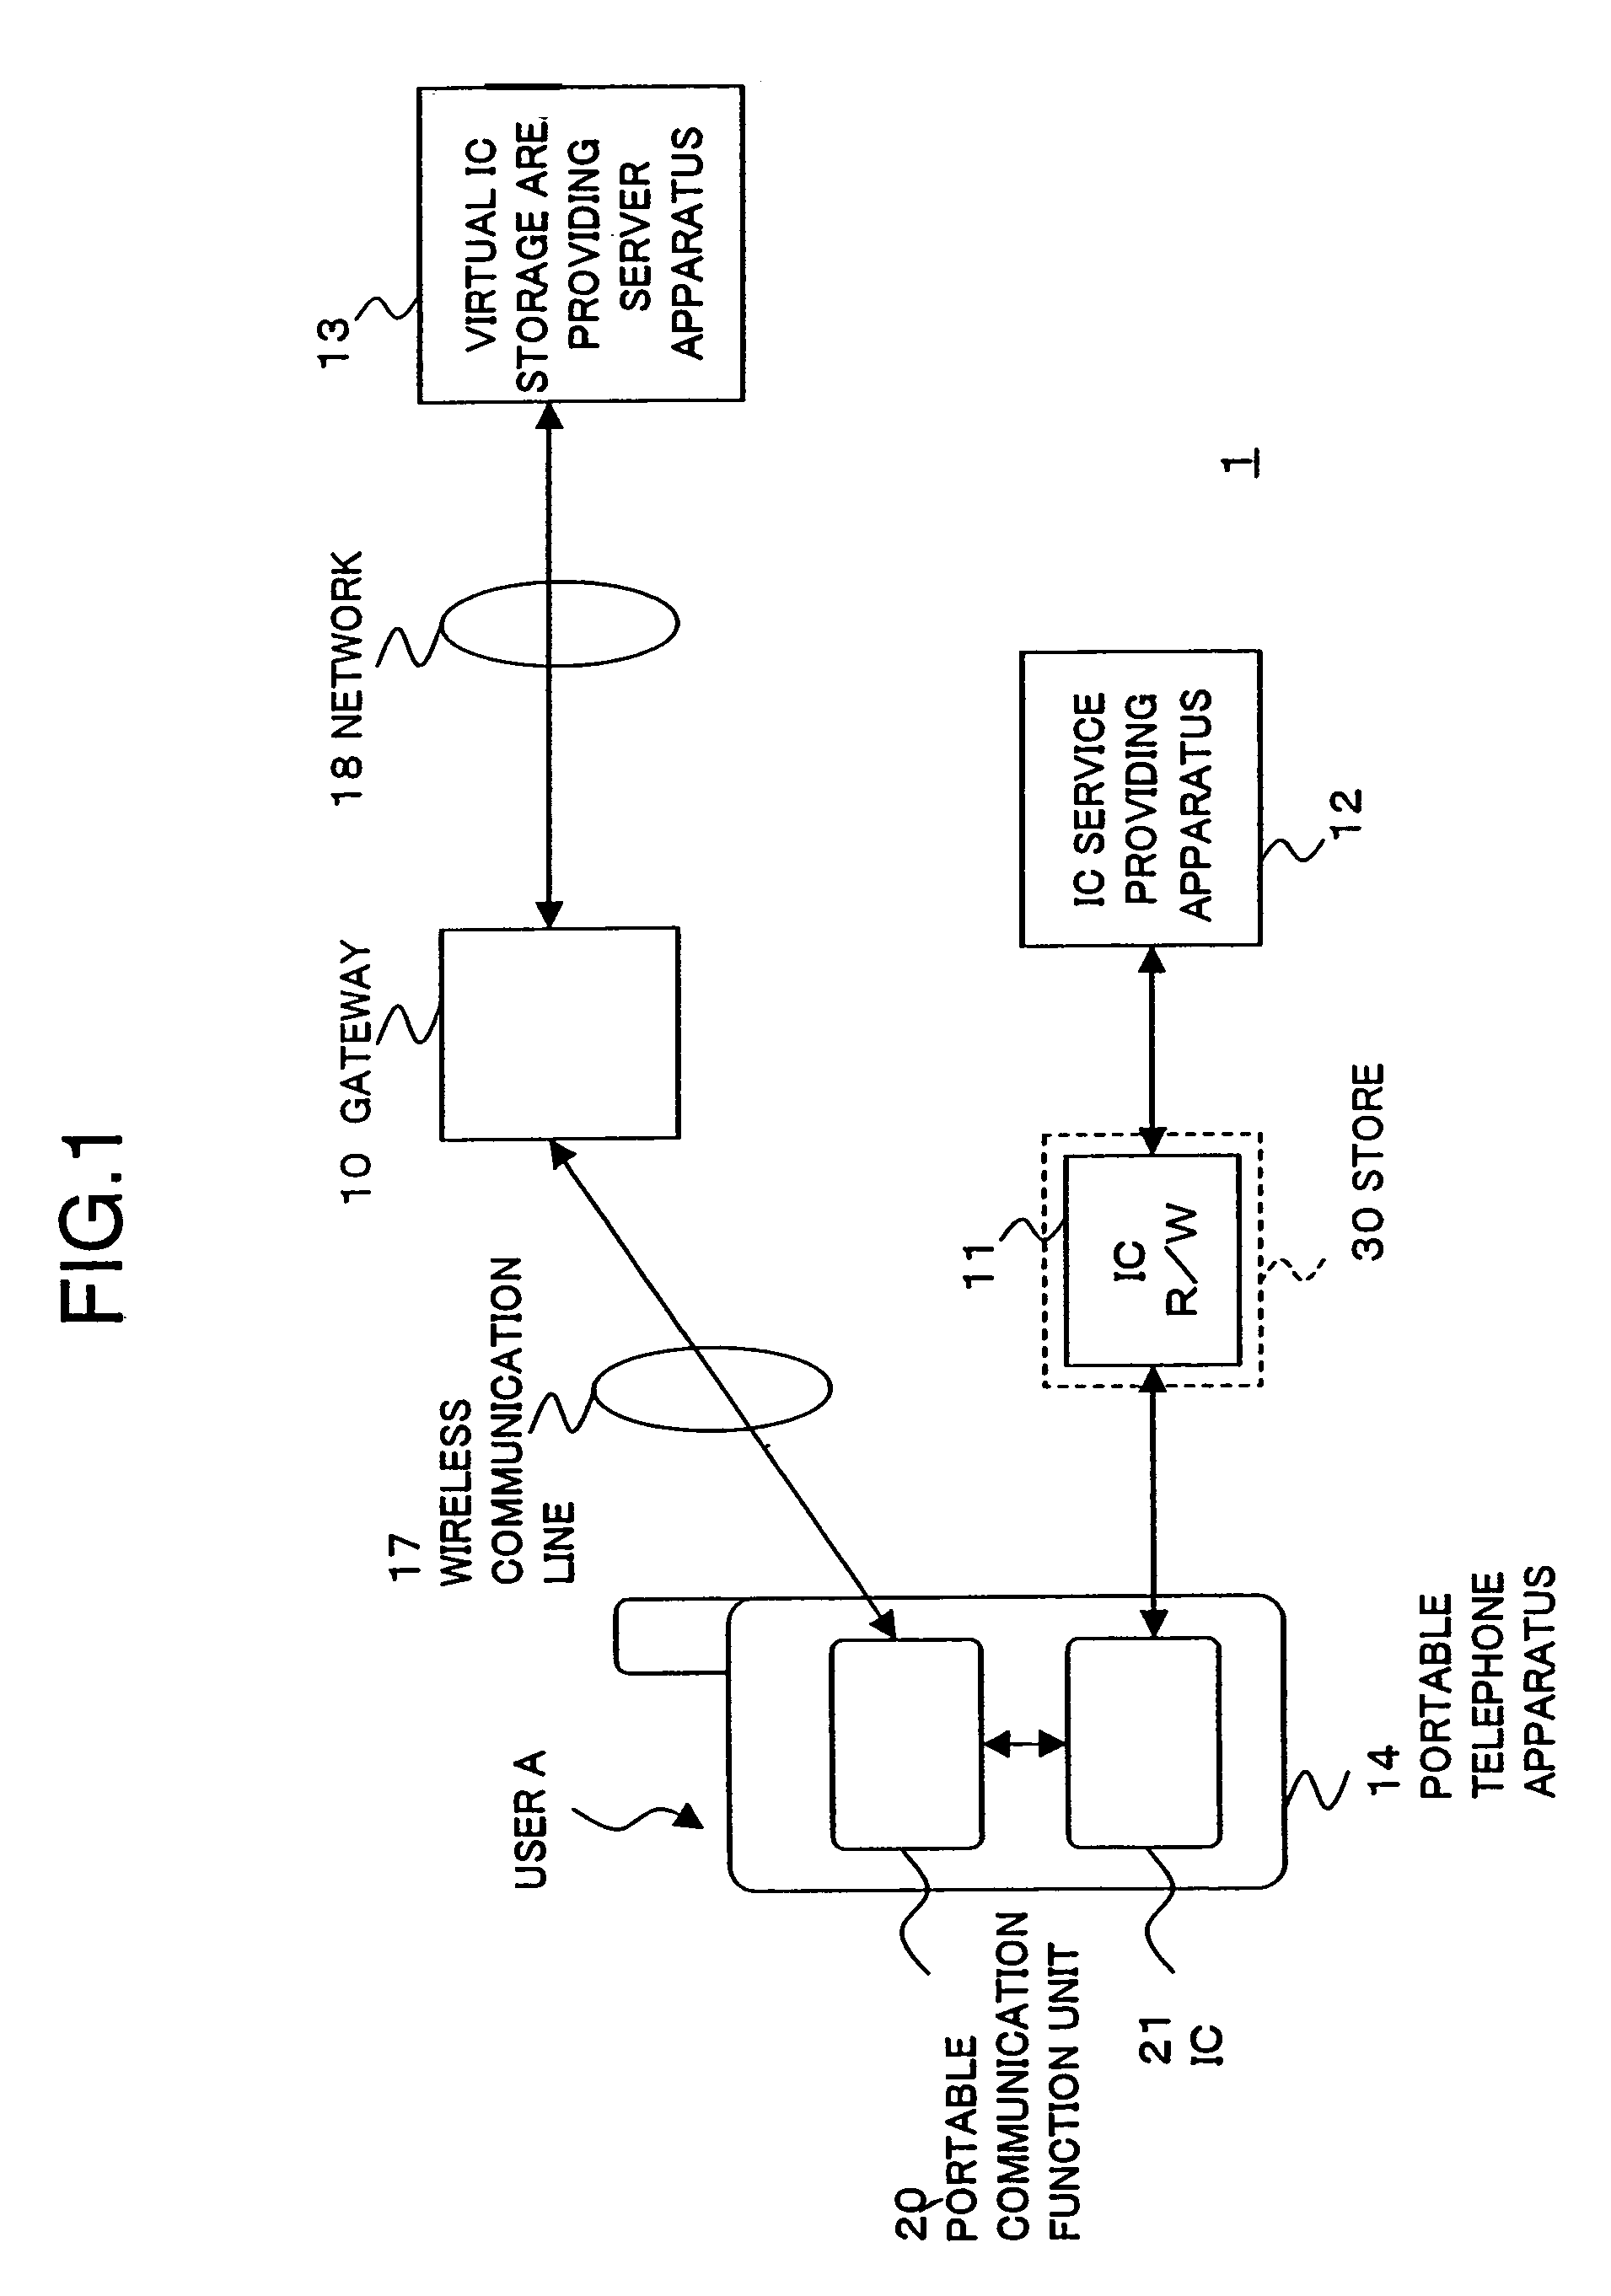 Service providing method and integrated circuit